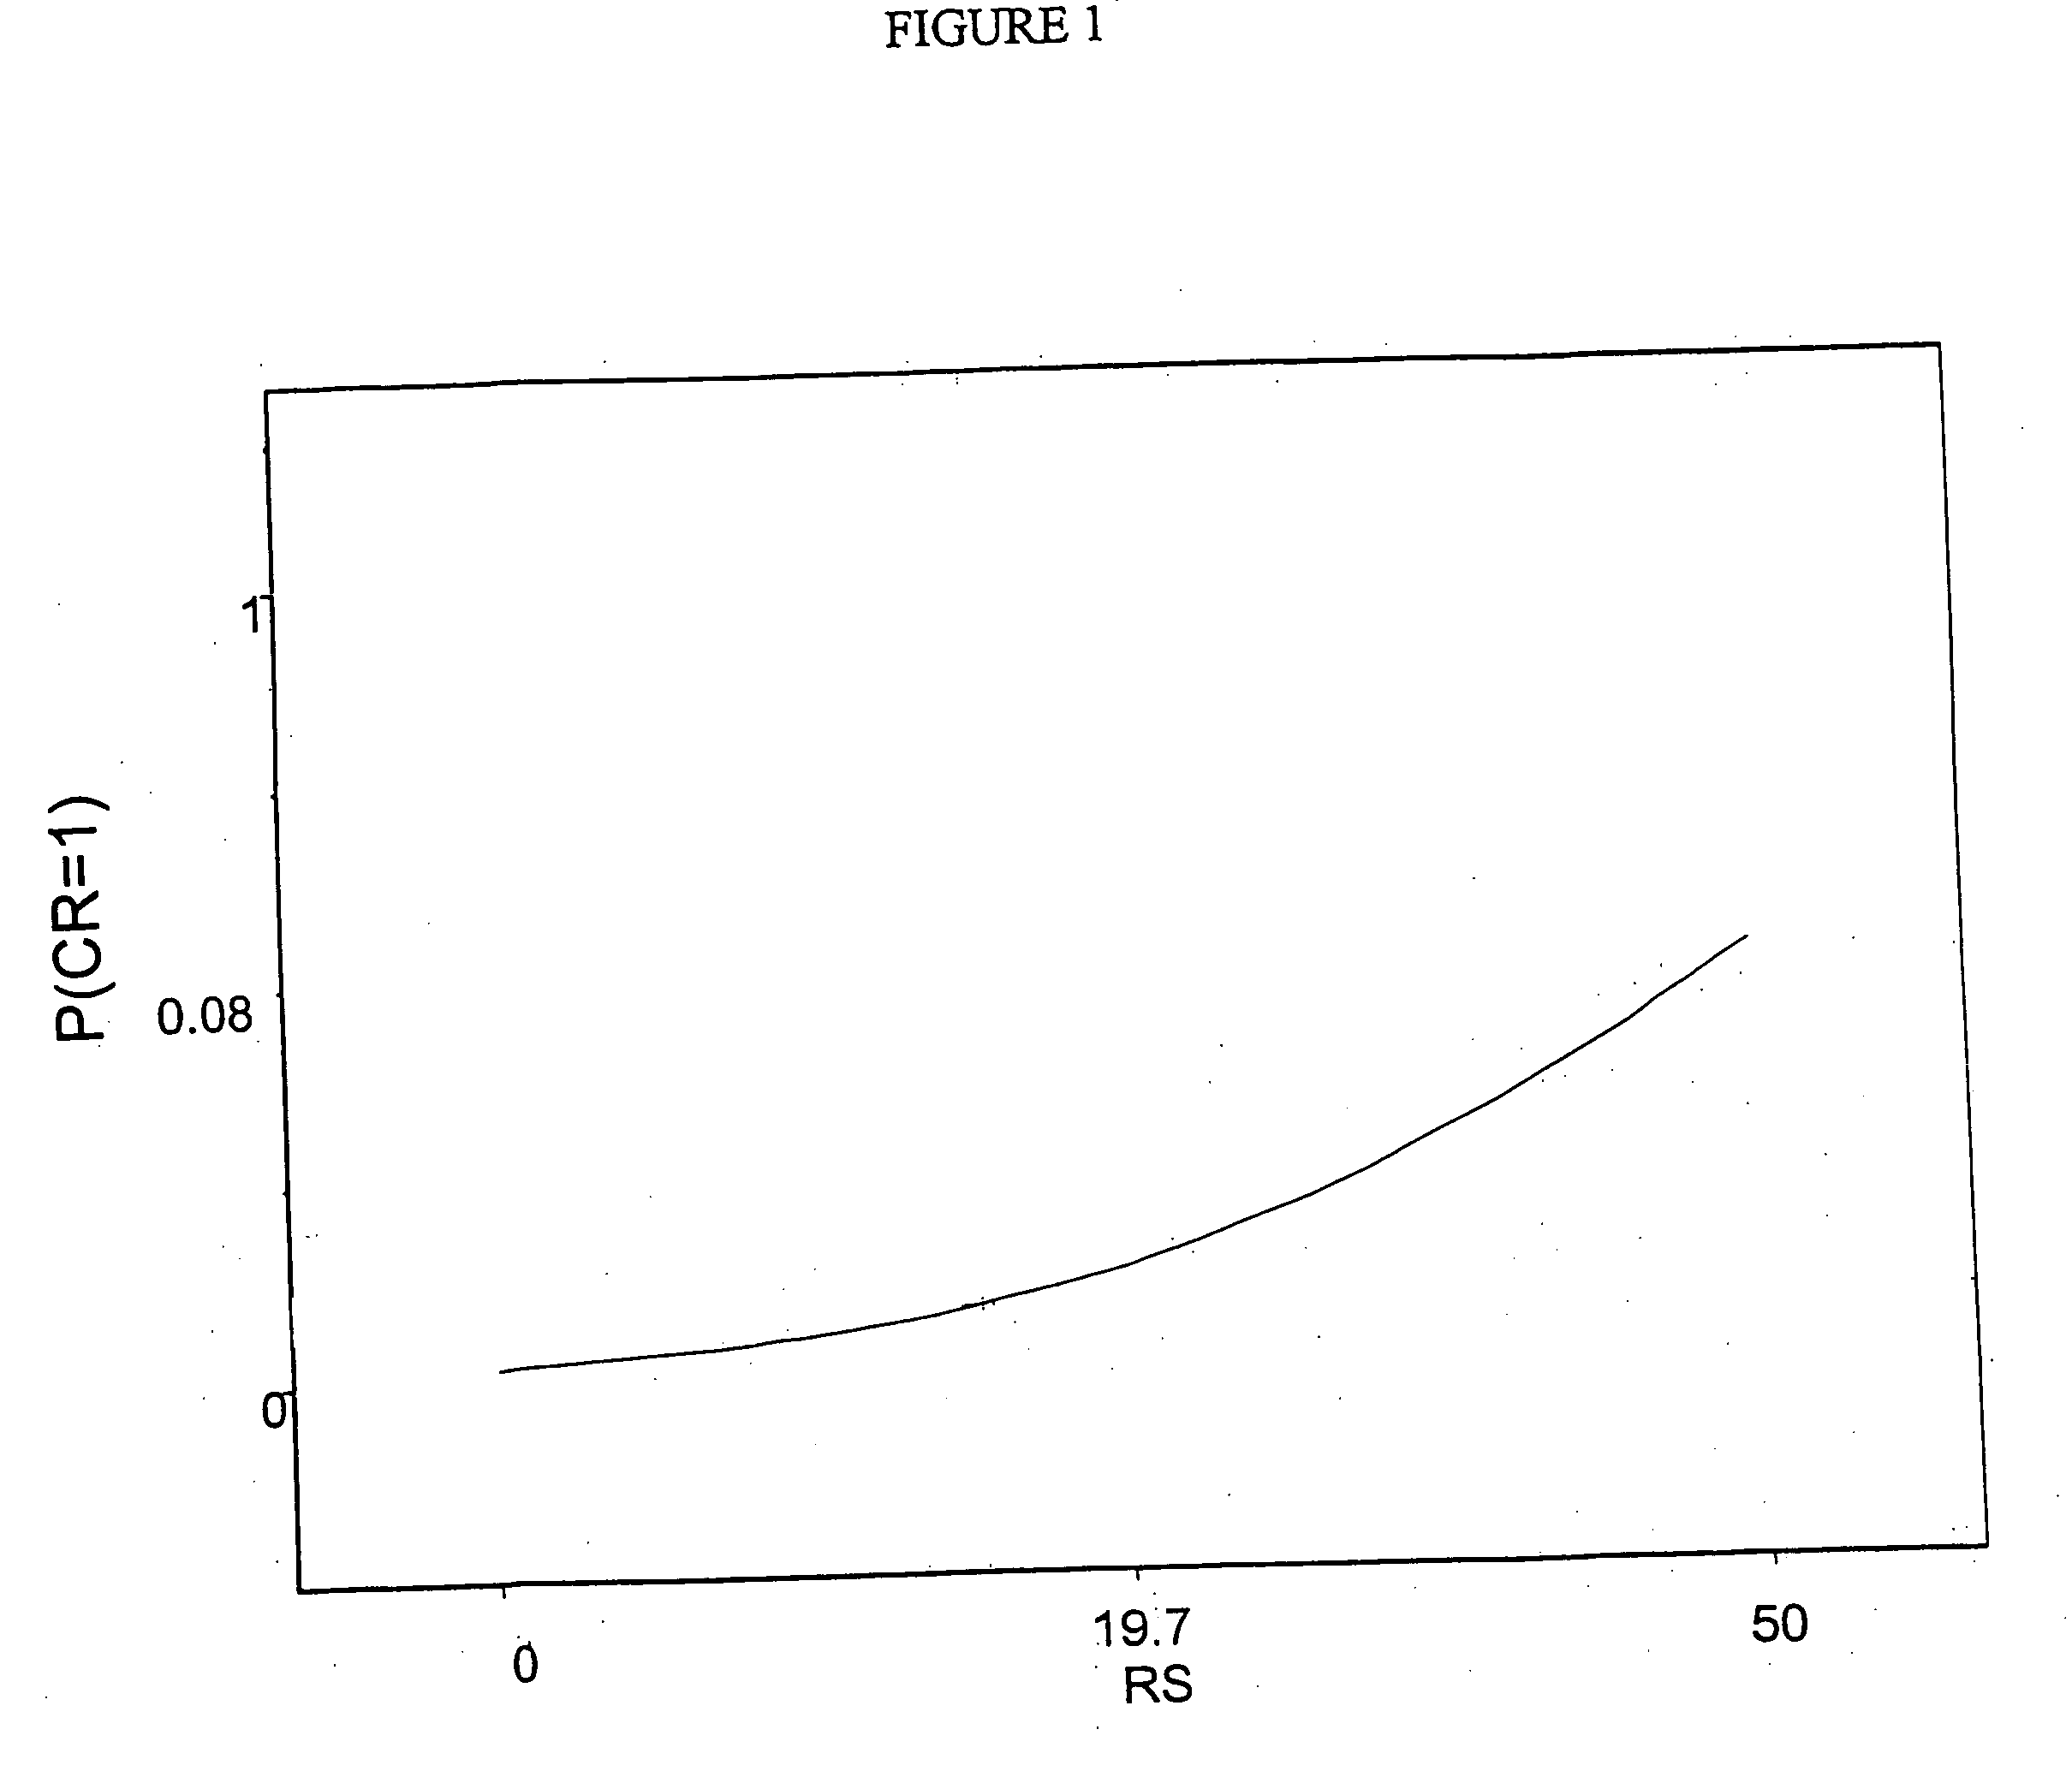 Gene expression markers for predicting response to chemotherapy